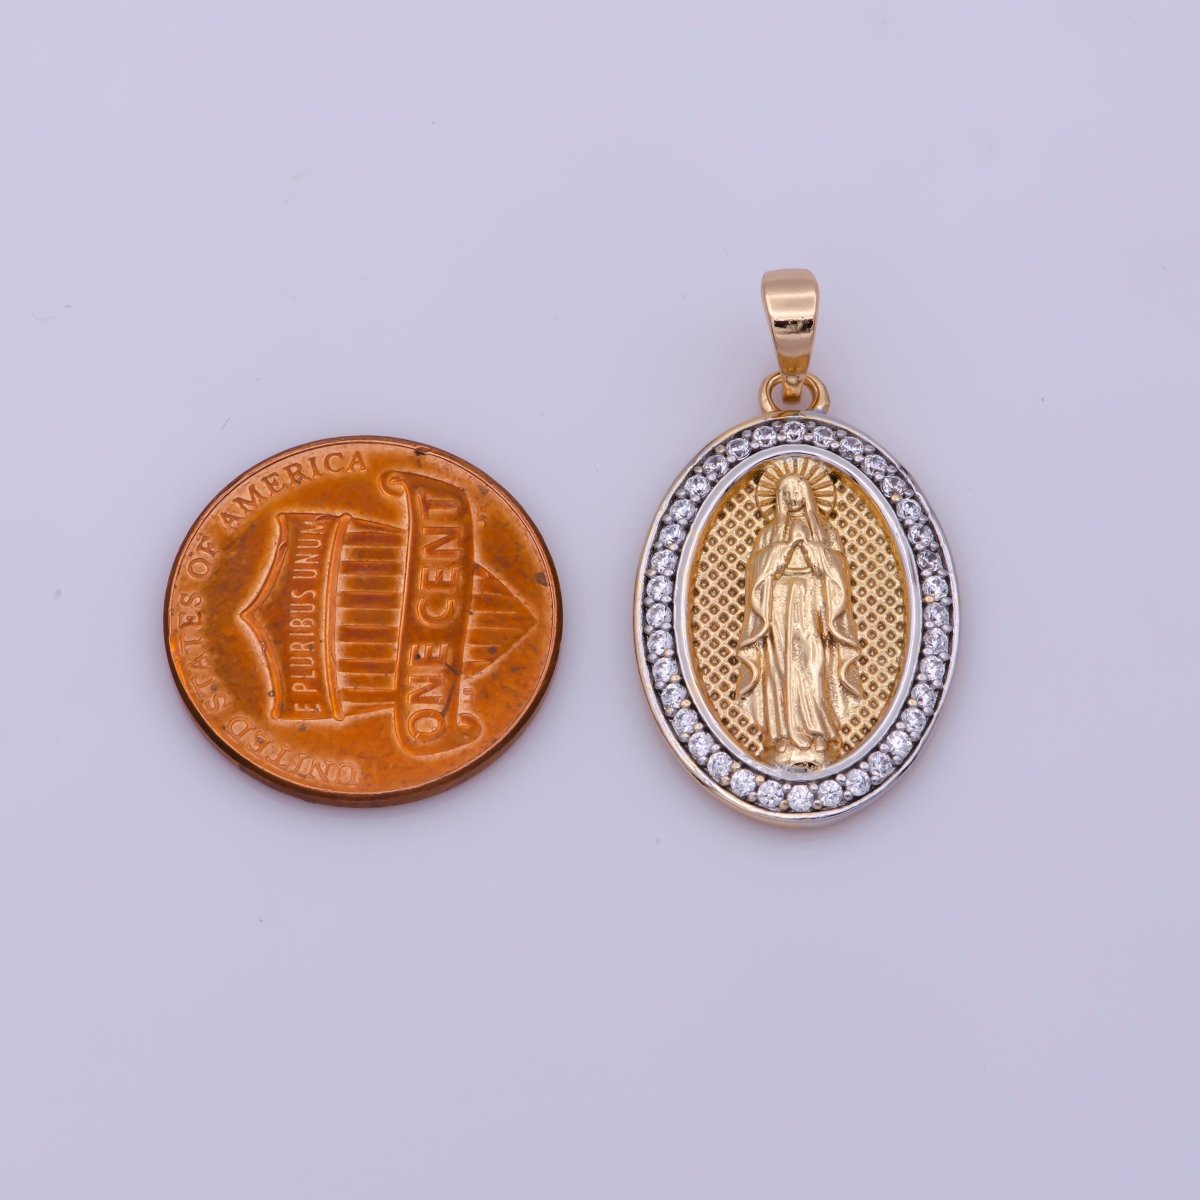 18k Gold Filled Virgin Mary Pendant, Virgin of Guadalupe, Our Lady Guadalupe, Religious / Dije de Guadalupe Medallion Charm N-1447 - DLUXCA